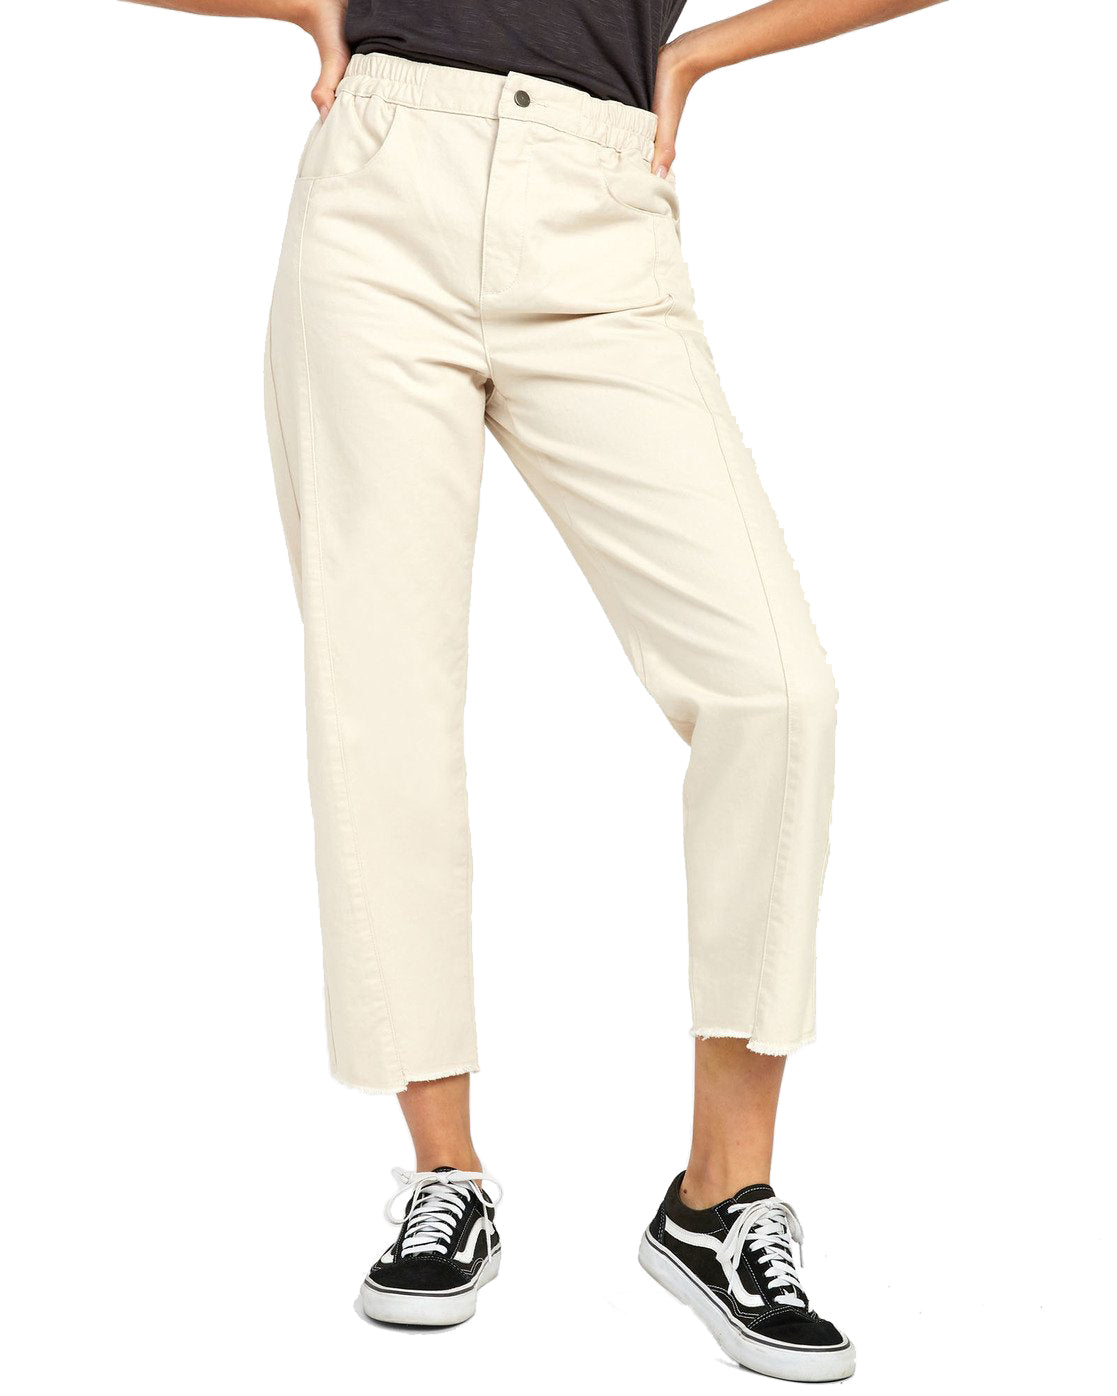 RVCA Out Going Pant OAT-Oatmeal S